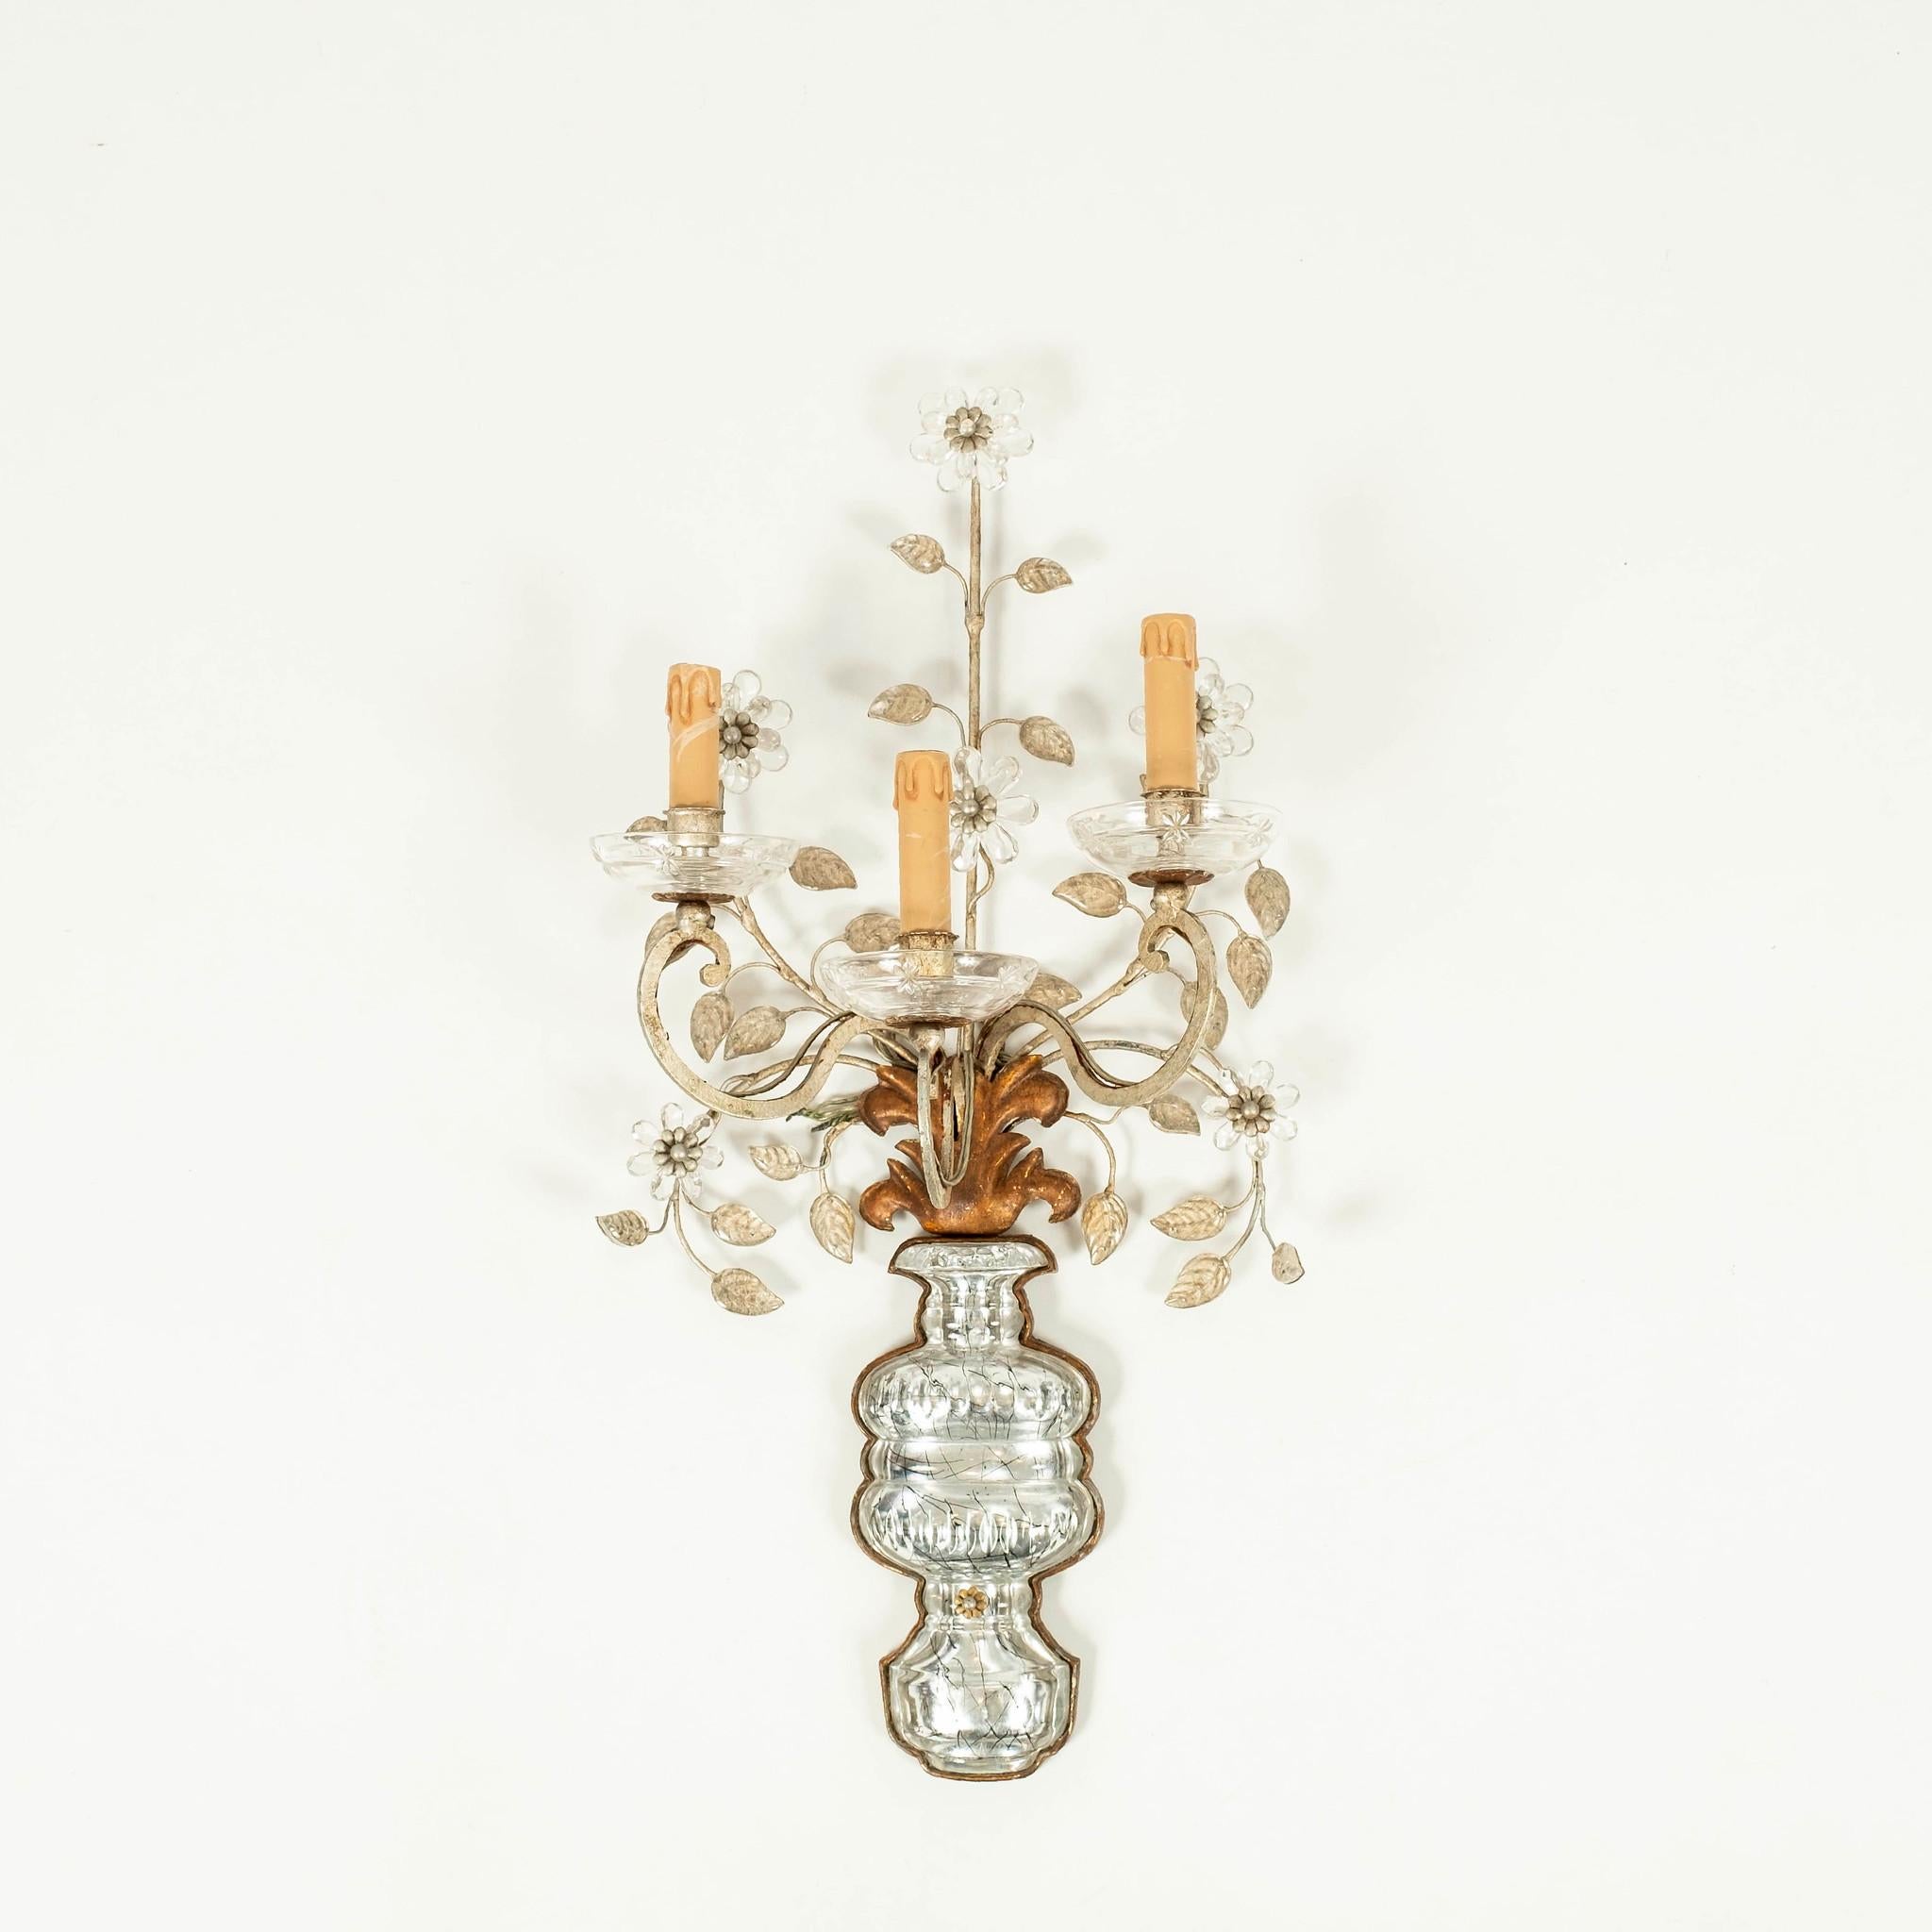 Pair of three arm gilded Bagués style rock crystal sconces showcasing a lovely floral and foliage plumage with vase.